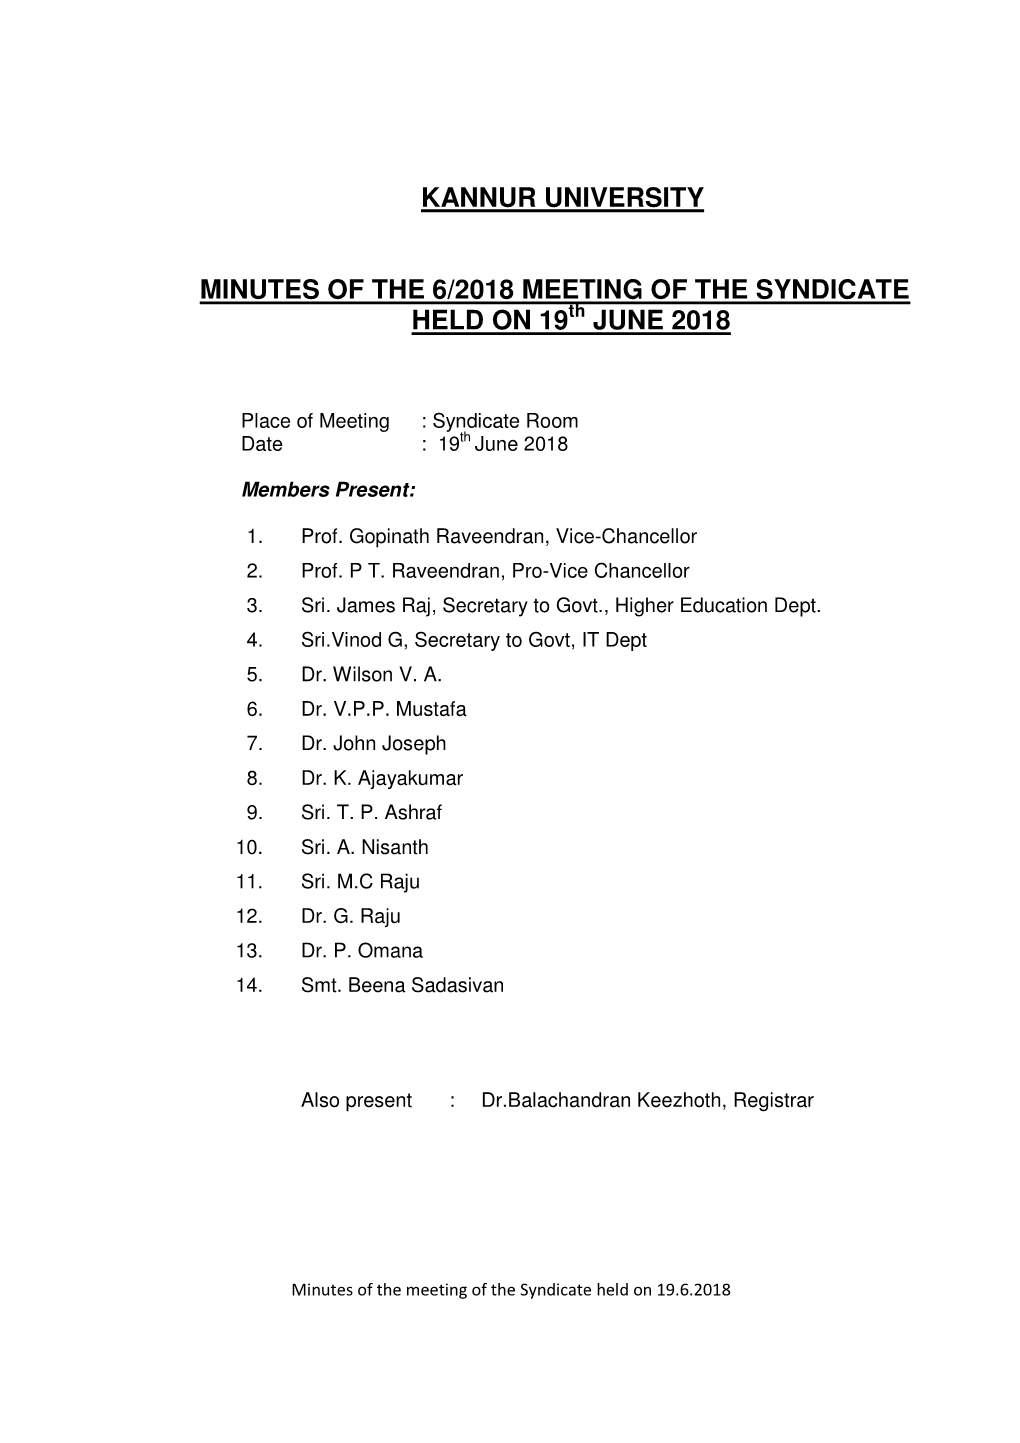 Kannur University Minutes of the 6/2018 Meeting of The